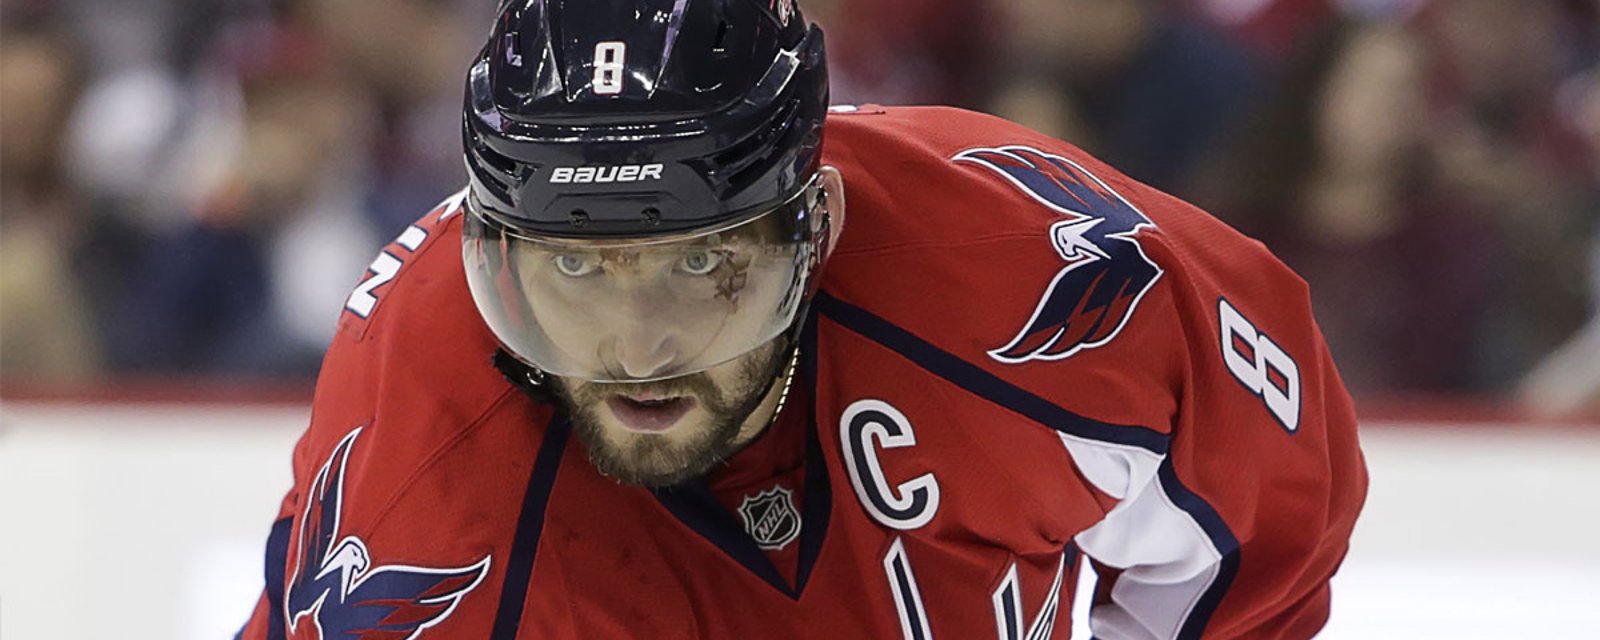 Ovechkin's teammates are playing a guessing game